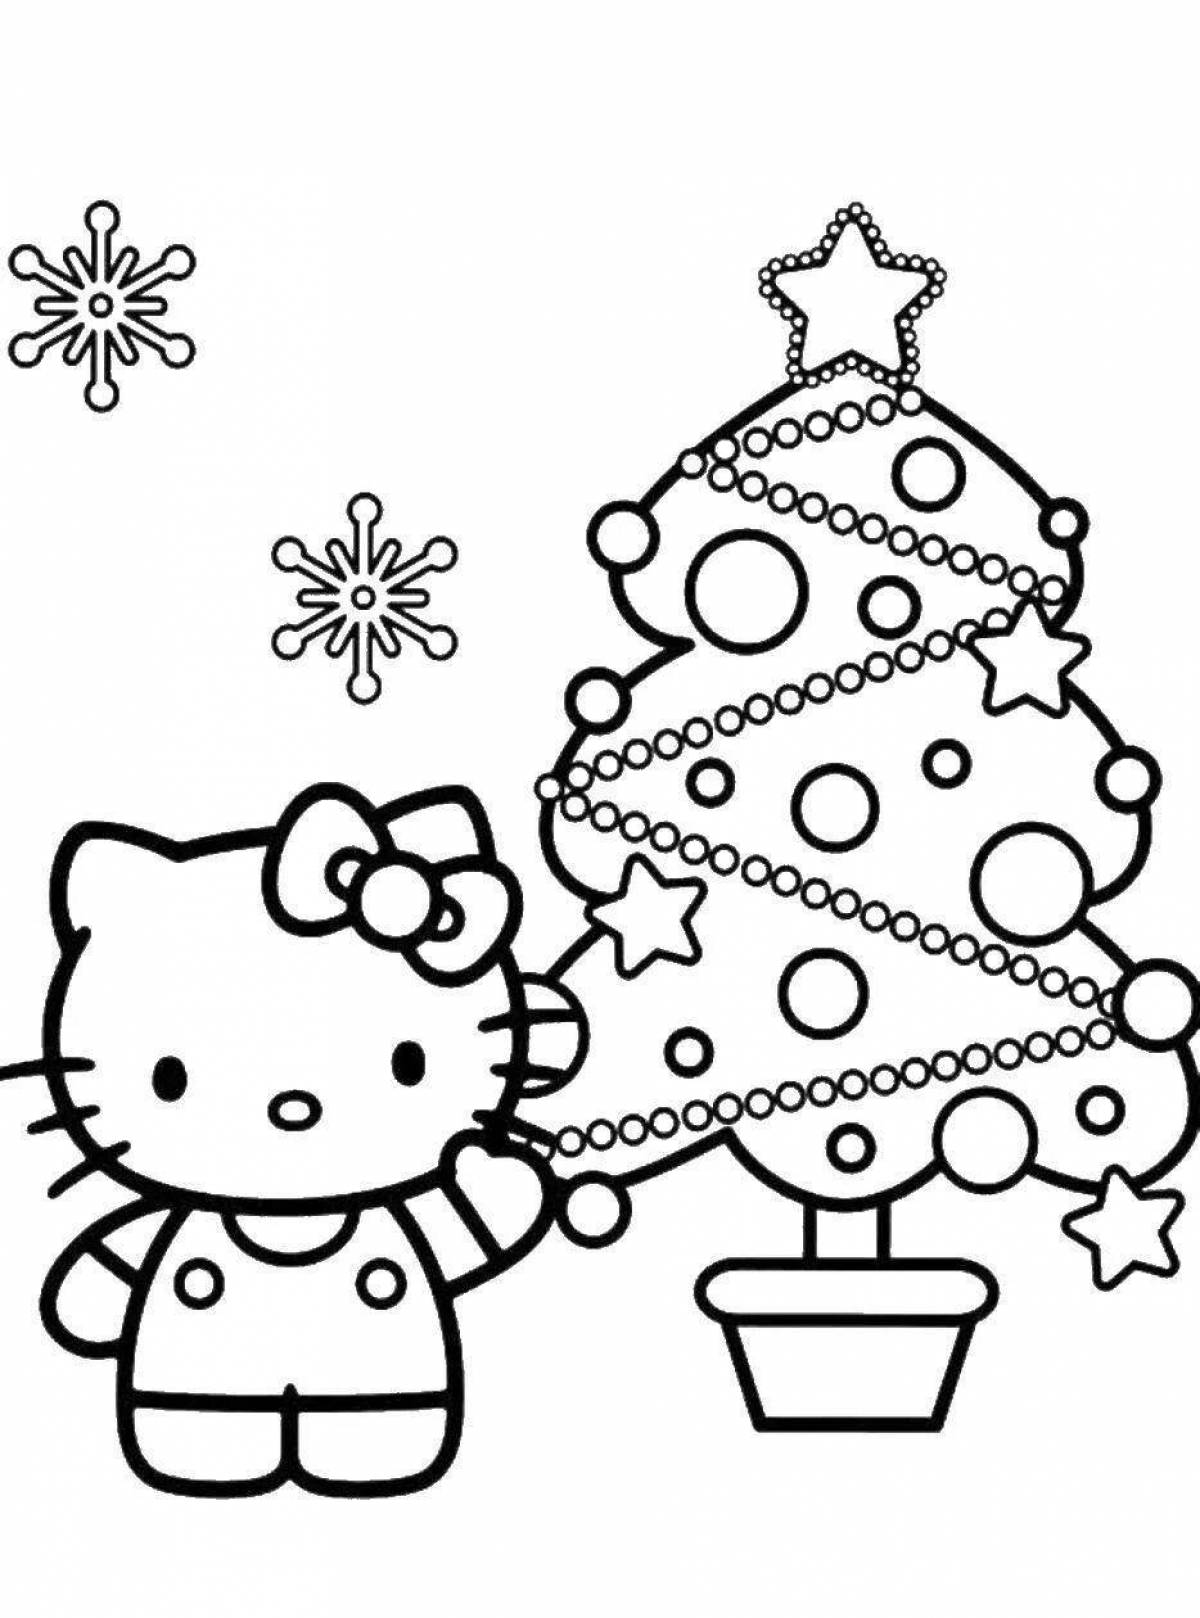 Fun Christmas coloring book for 2 year olds